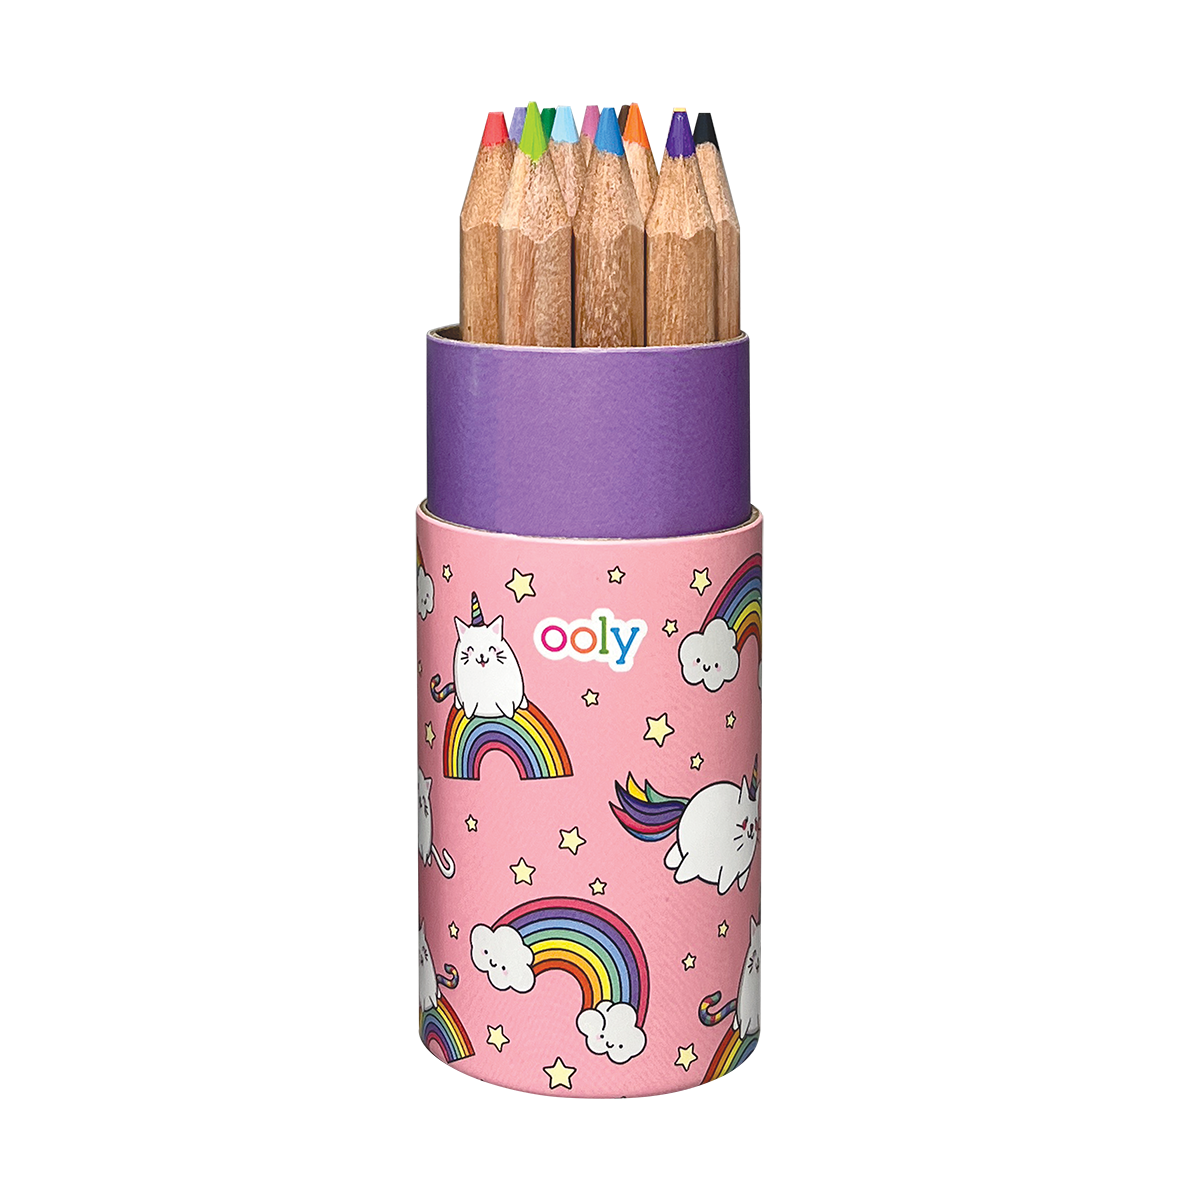 Ooly Modern Metallic Colored Pencils, Drawing and Coloring Pencils for Kids  and Adults, Colorful School Supplies for Any Arts and Crafts, Great for